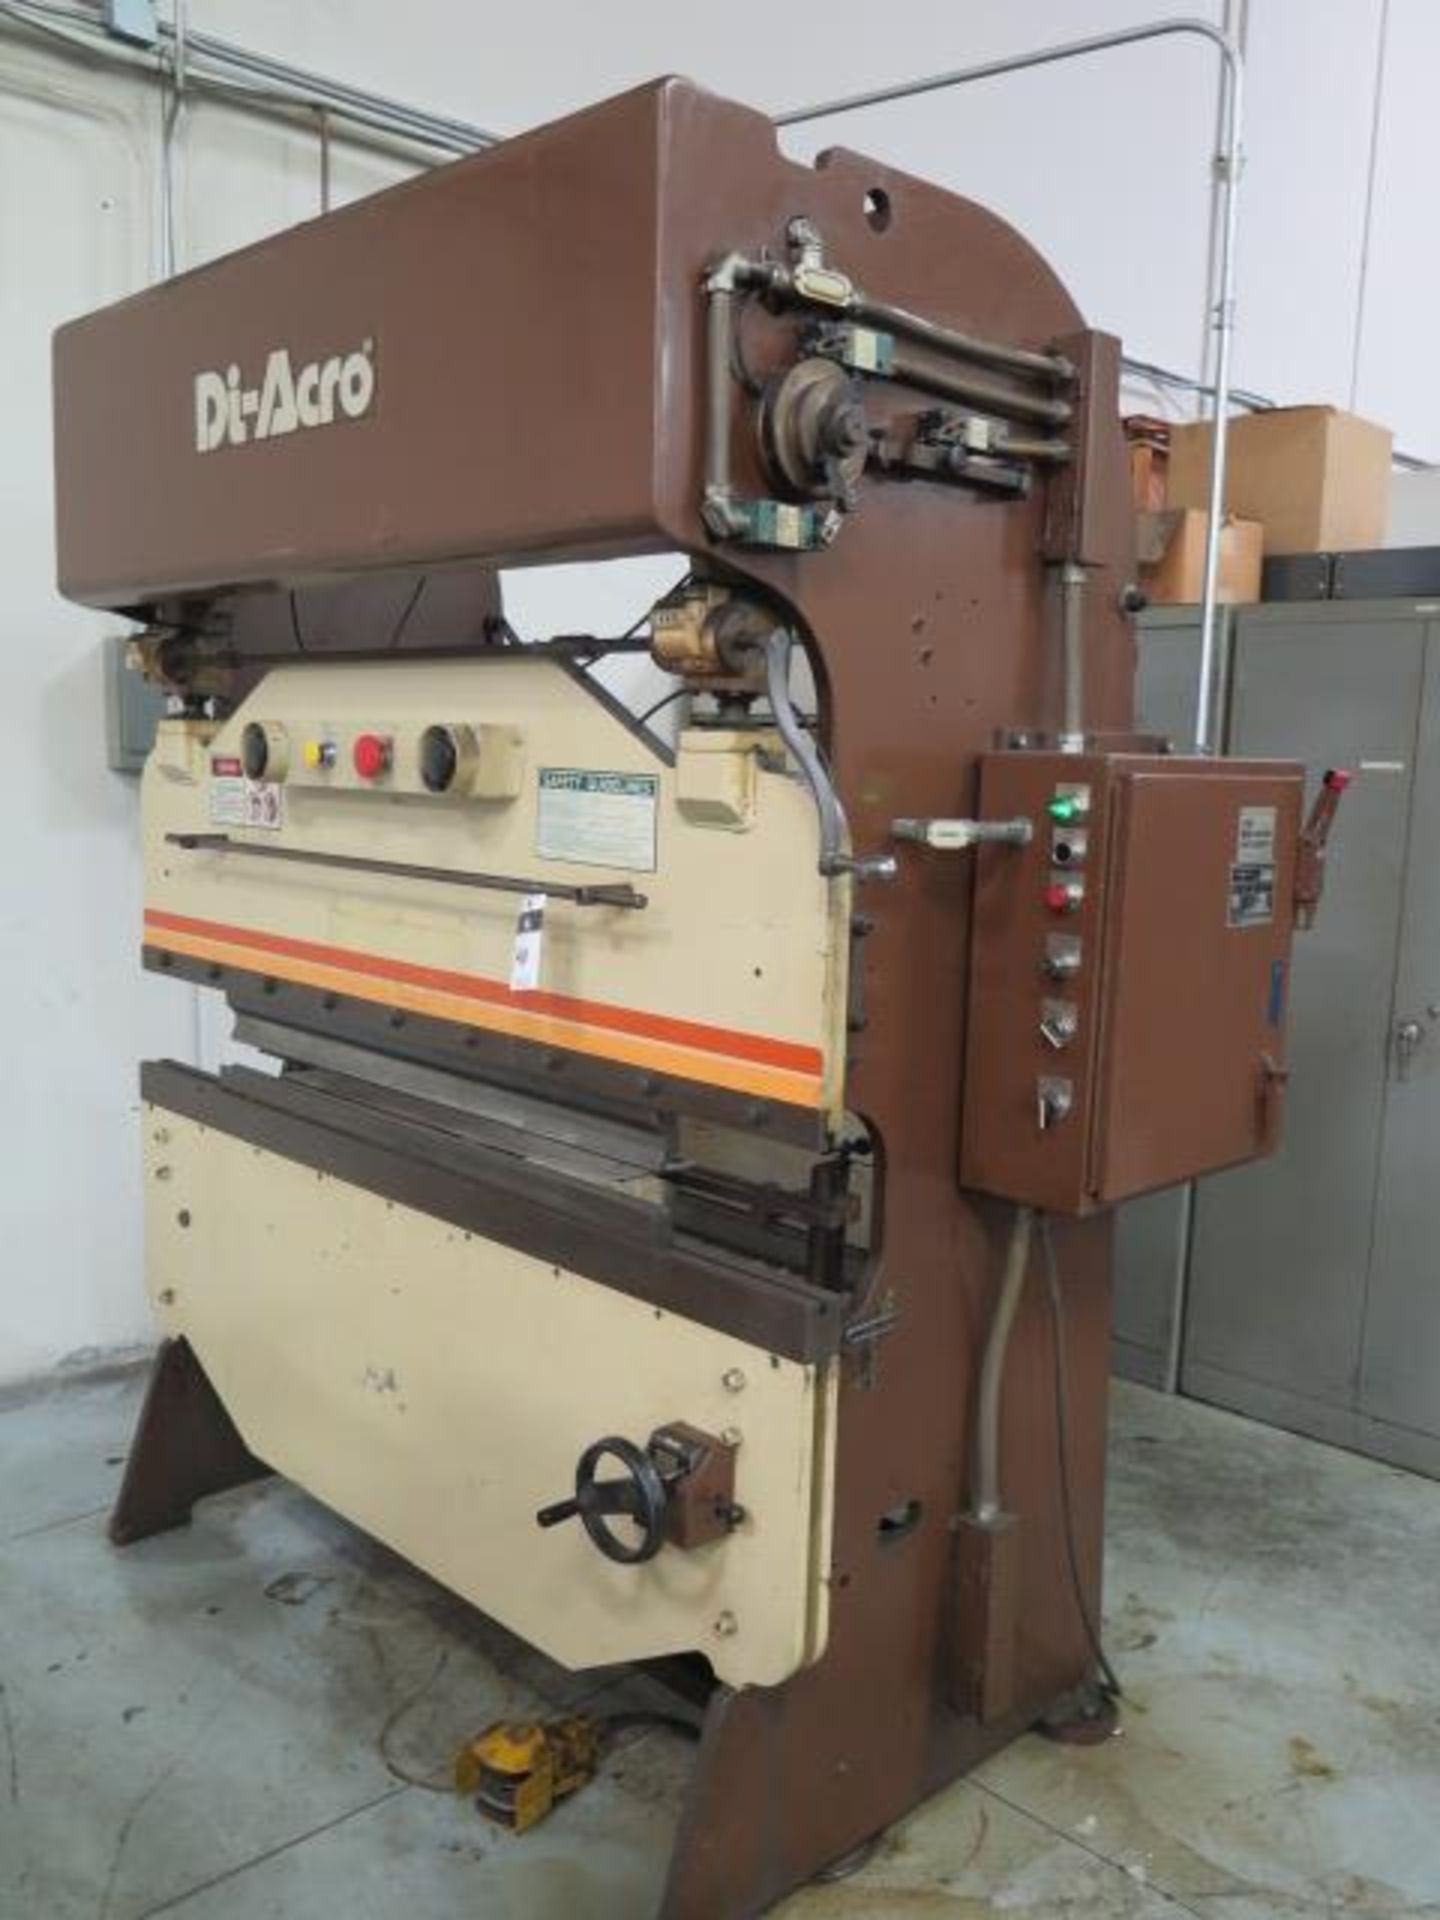 DiAcro 4-7272” Press Brake w/ Dial Back Gage, 72” Length, This Item is Sold AS IS and NO Warranty. - Image 3 of 10